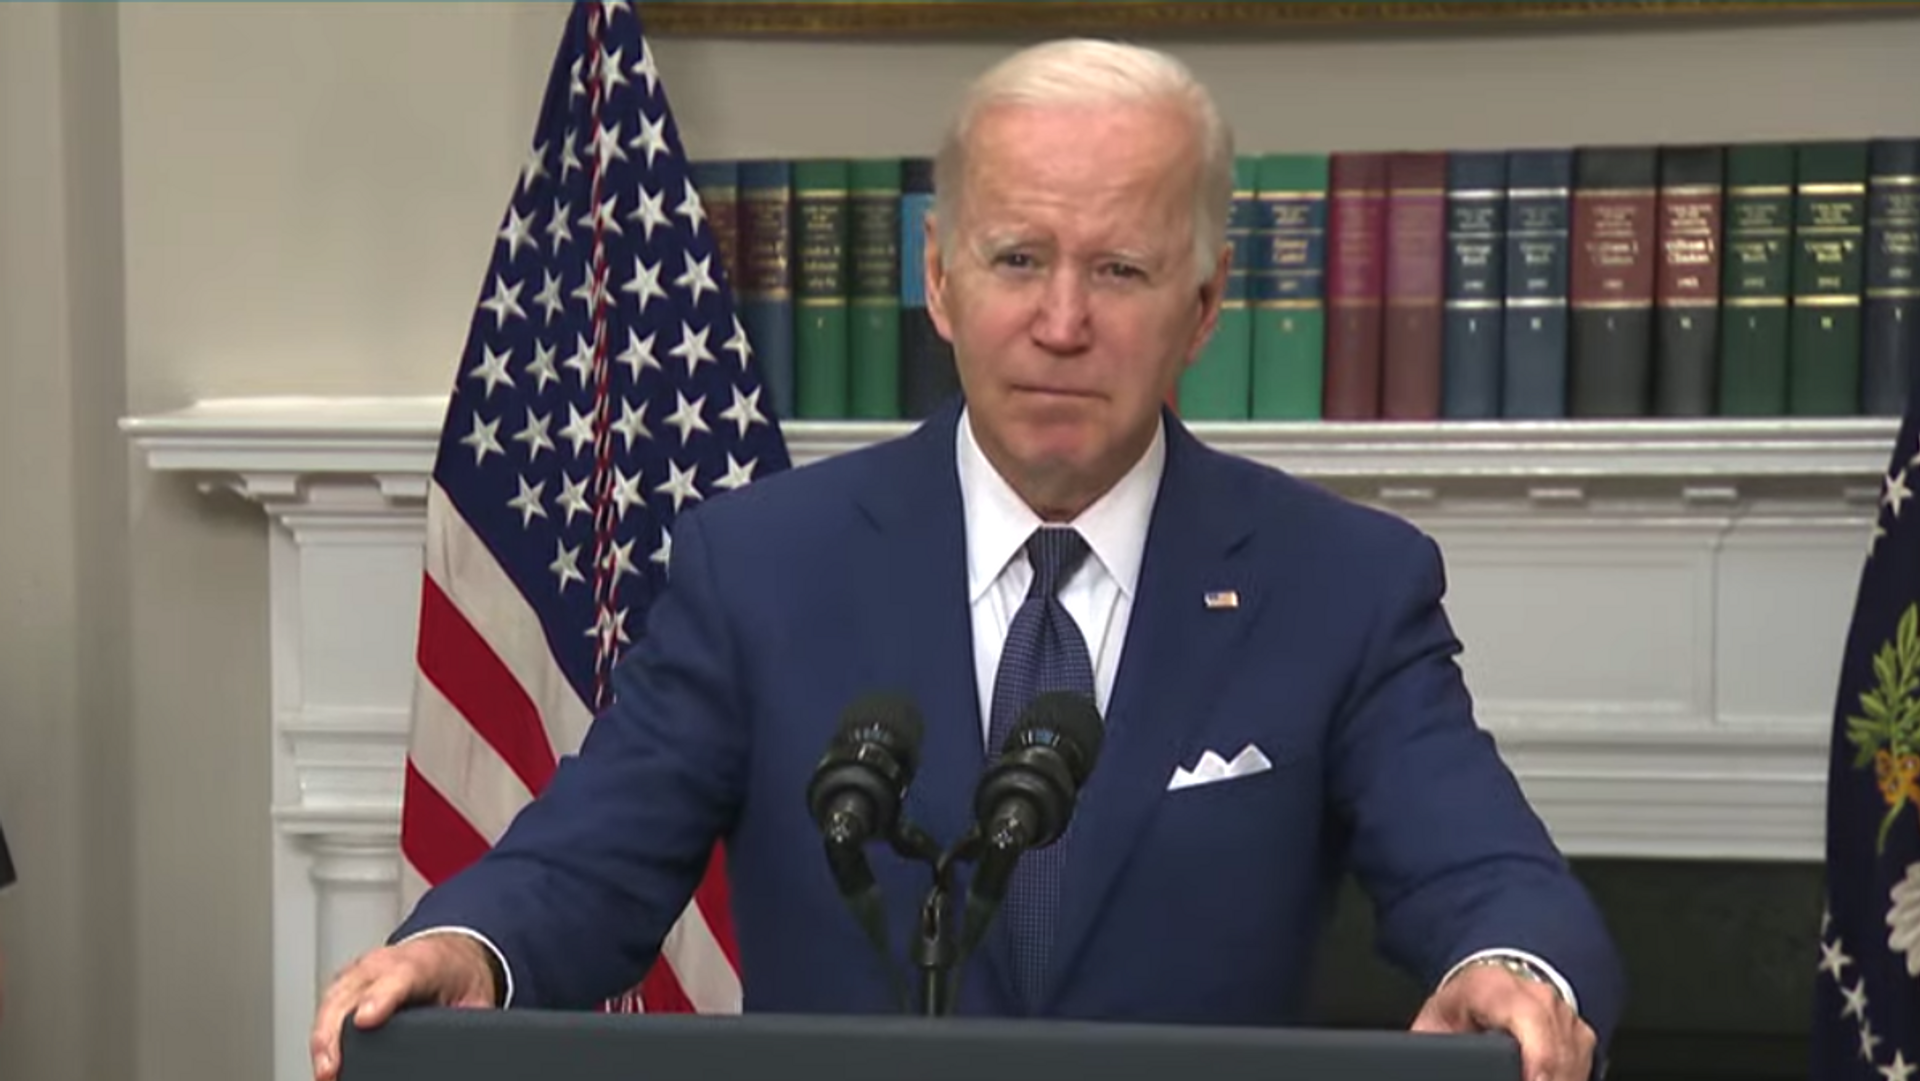 US President Joe Biden addresses the nation on May 24, 2022, after news that at least 18 children and one teacher was killed during a mass shooting at Robb Elementary School in Uvalde, Texas. - Sputnik International, 1920, 25.05.2022